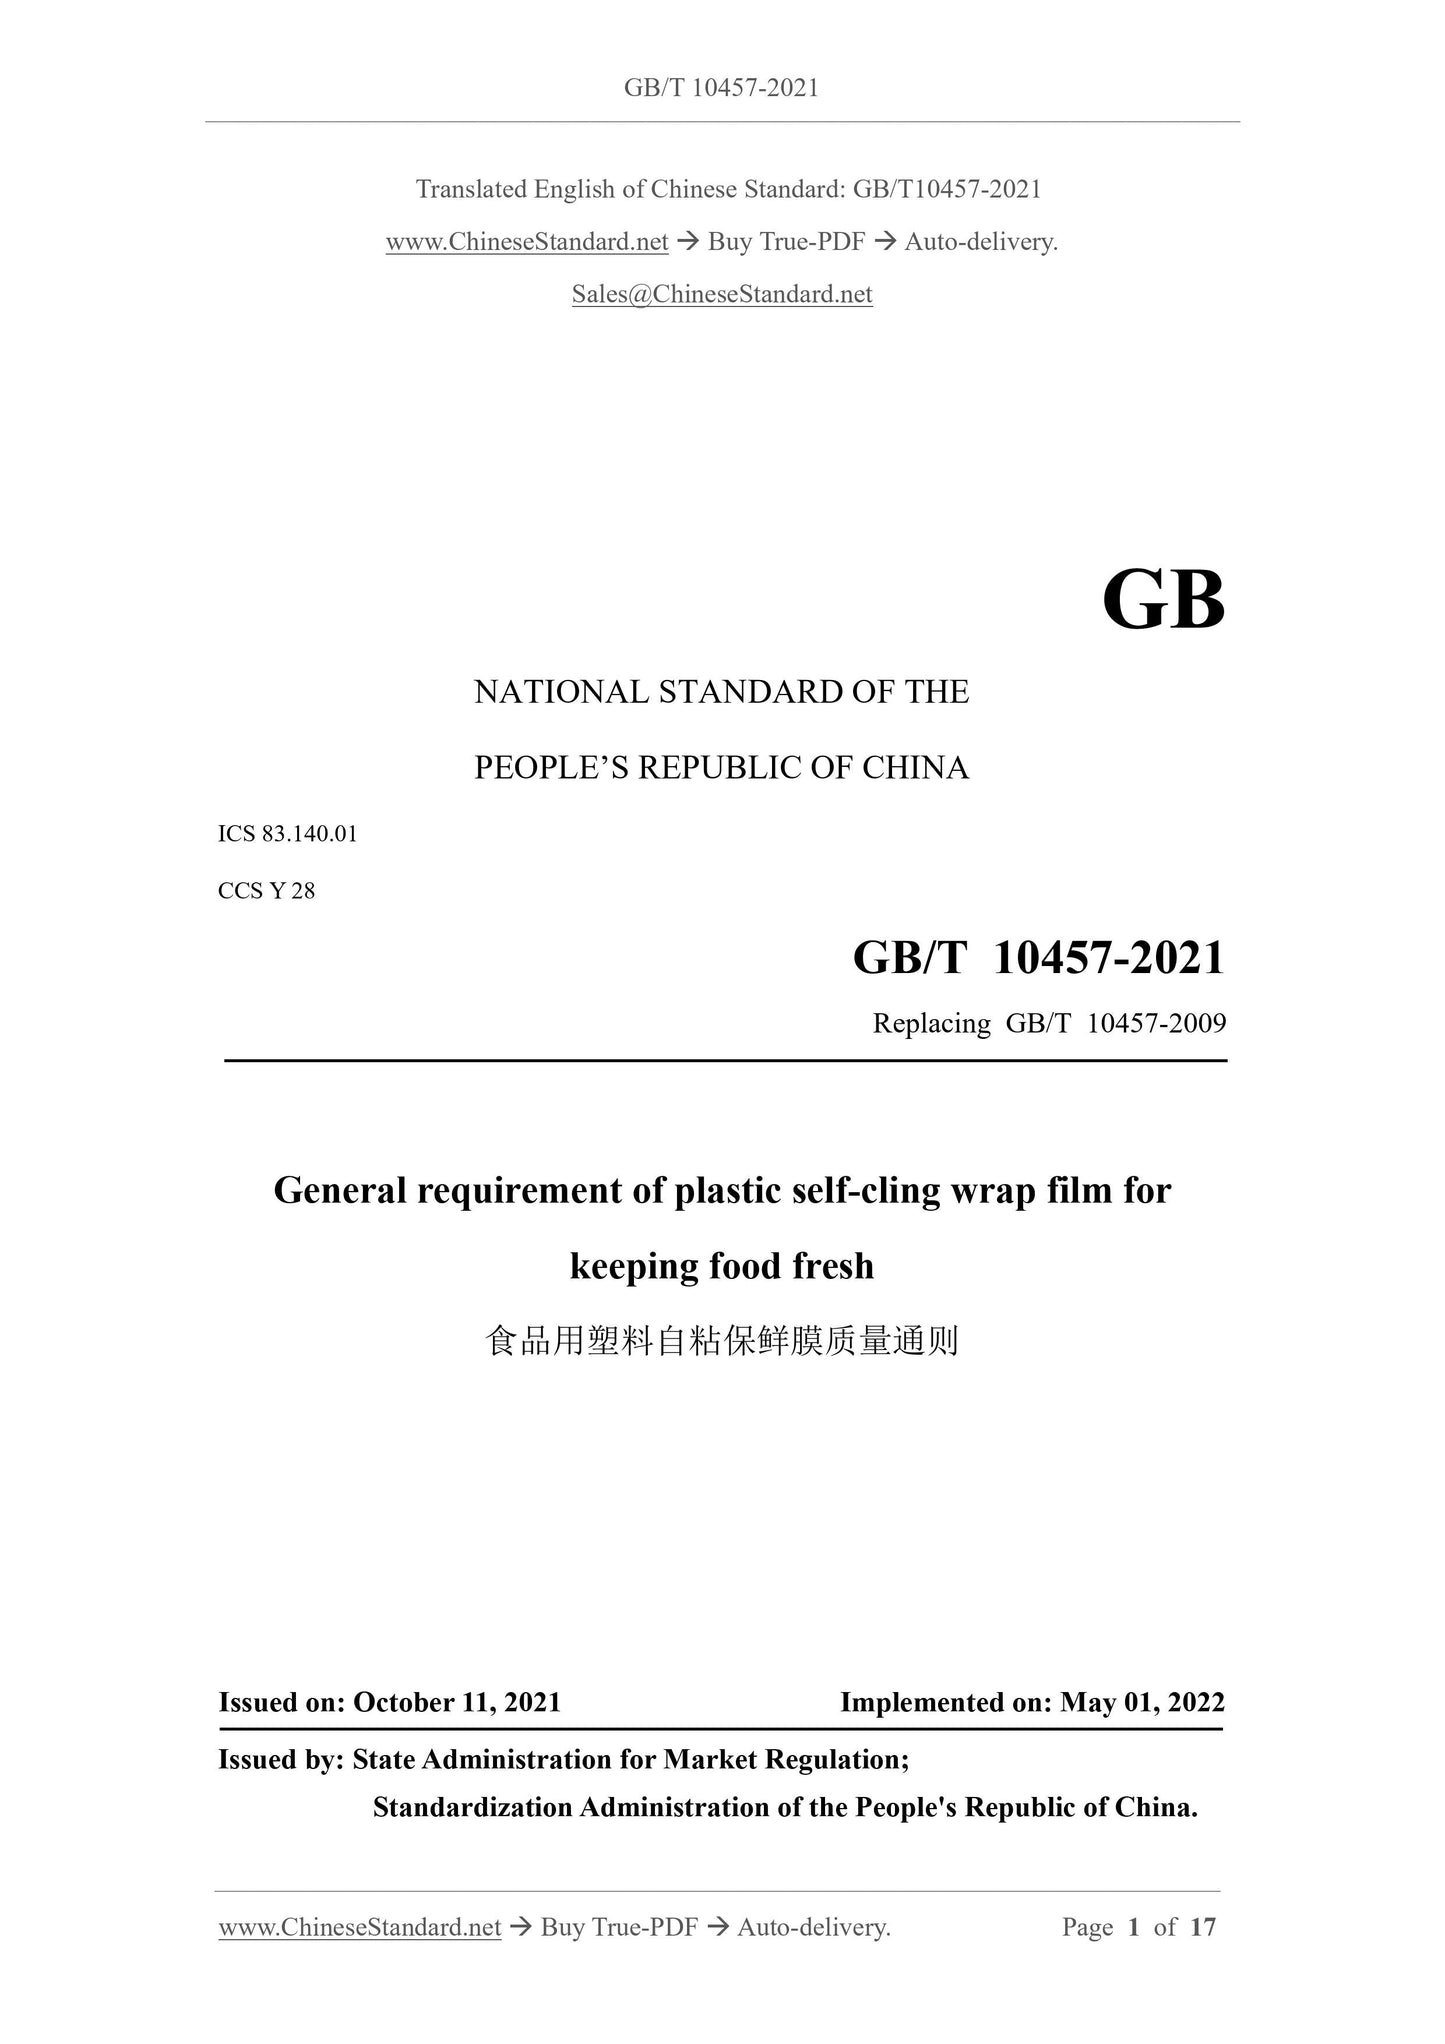 GB/T 10457-2021 Page 1